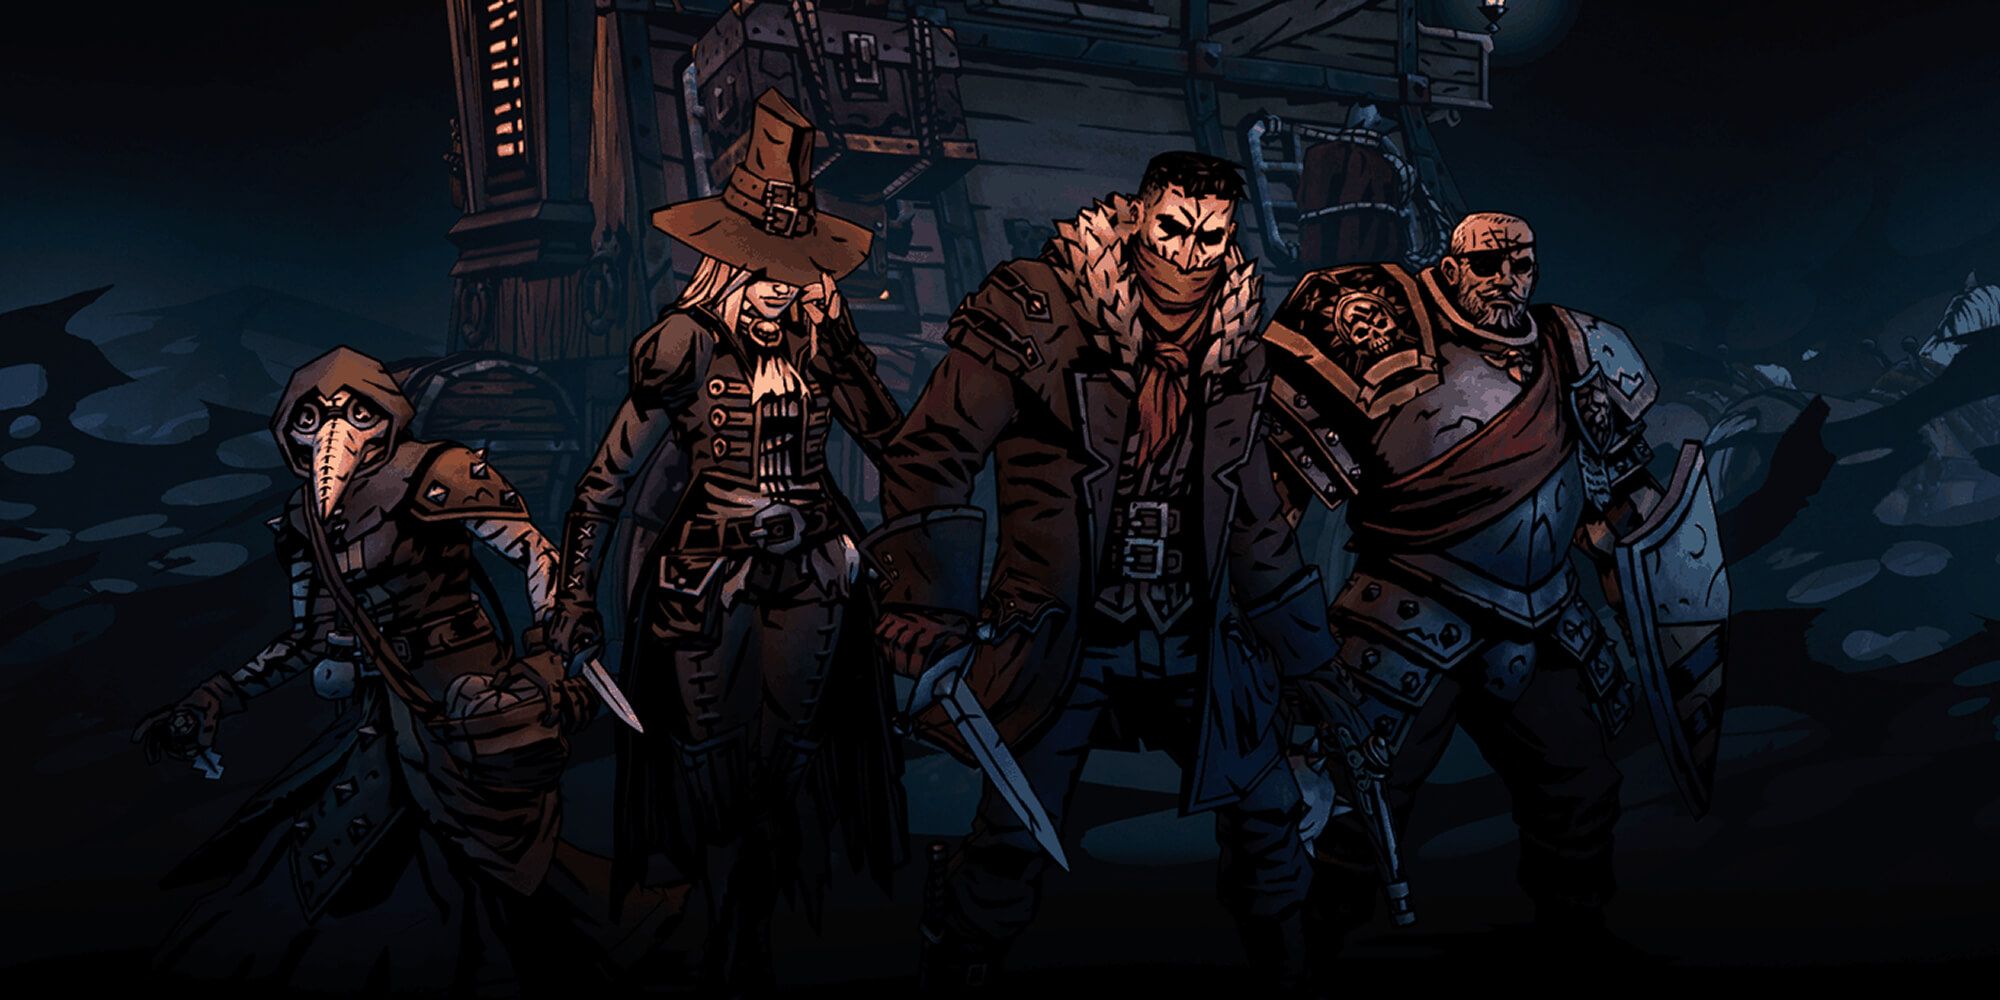 A Cast Of Classes Prepare To Delve Into The Darkest Dungeon